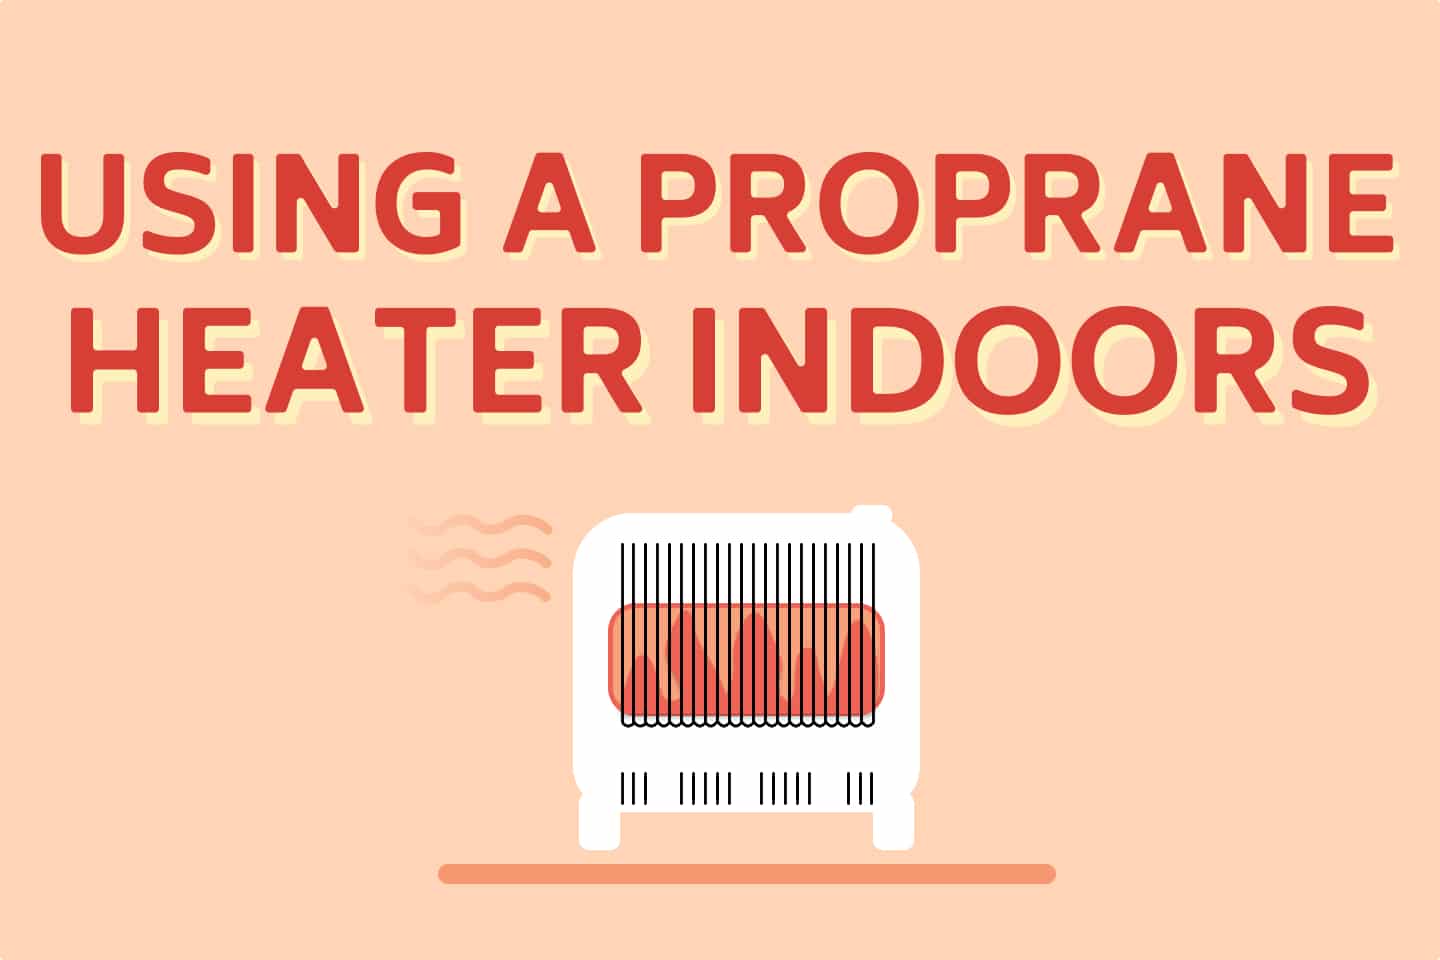 Can You Use Propane Heater Indoors and Is It SAFE? [7 Working Tips]